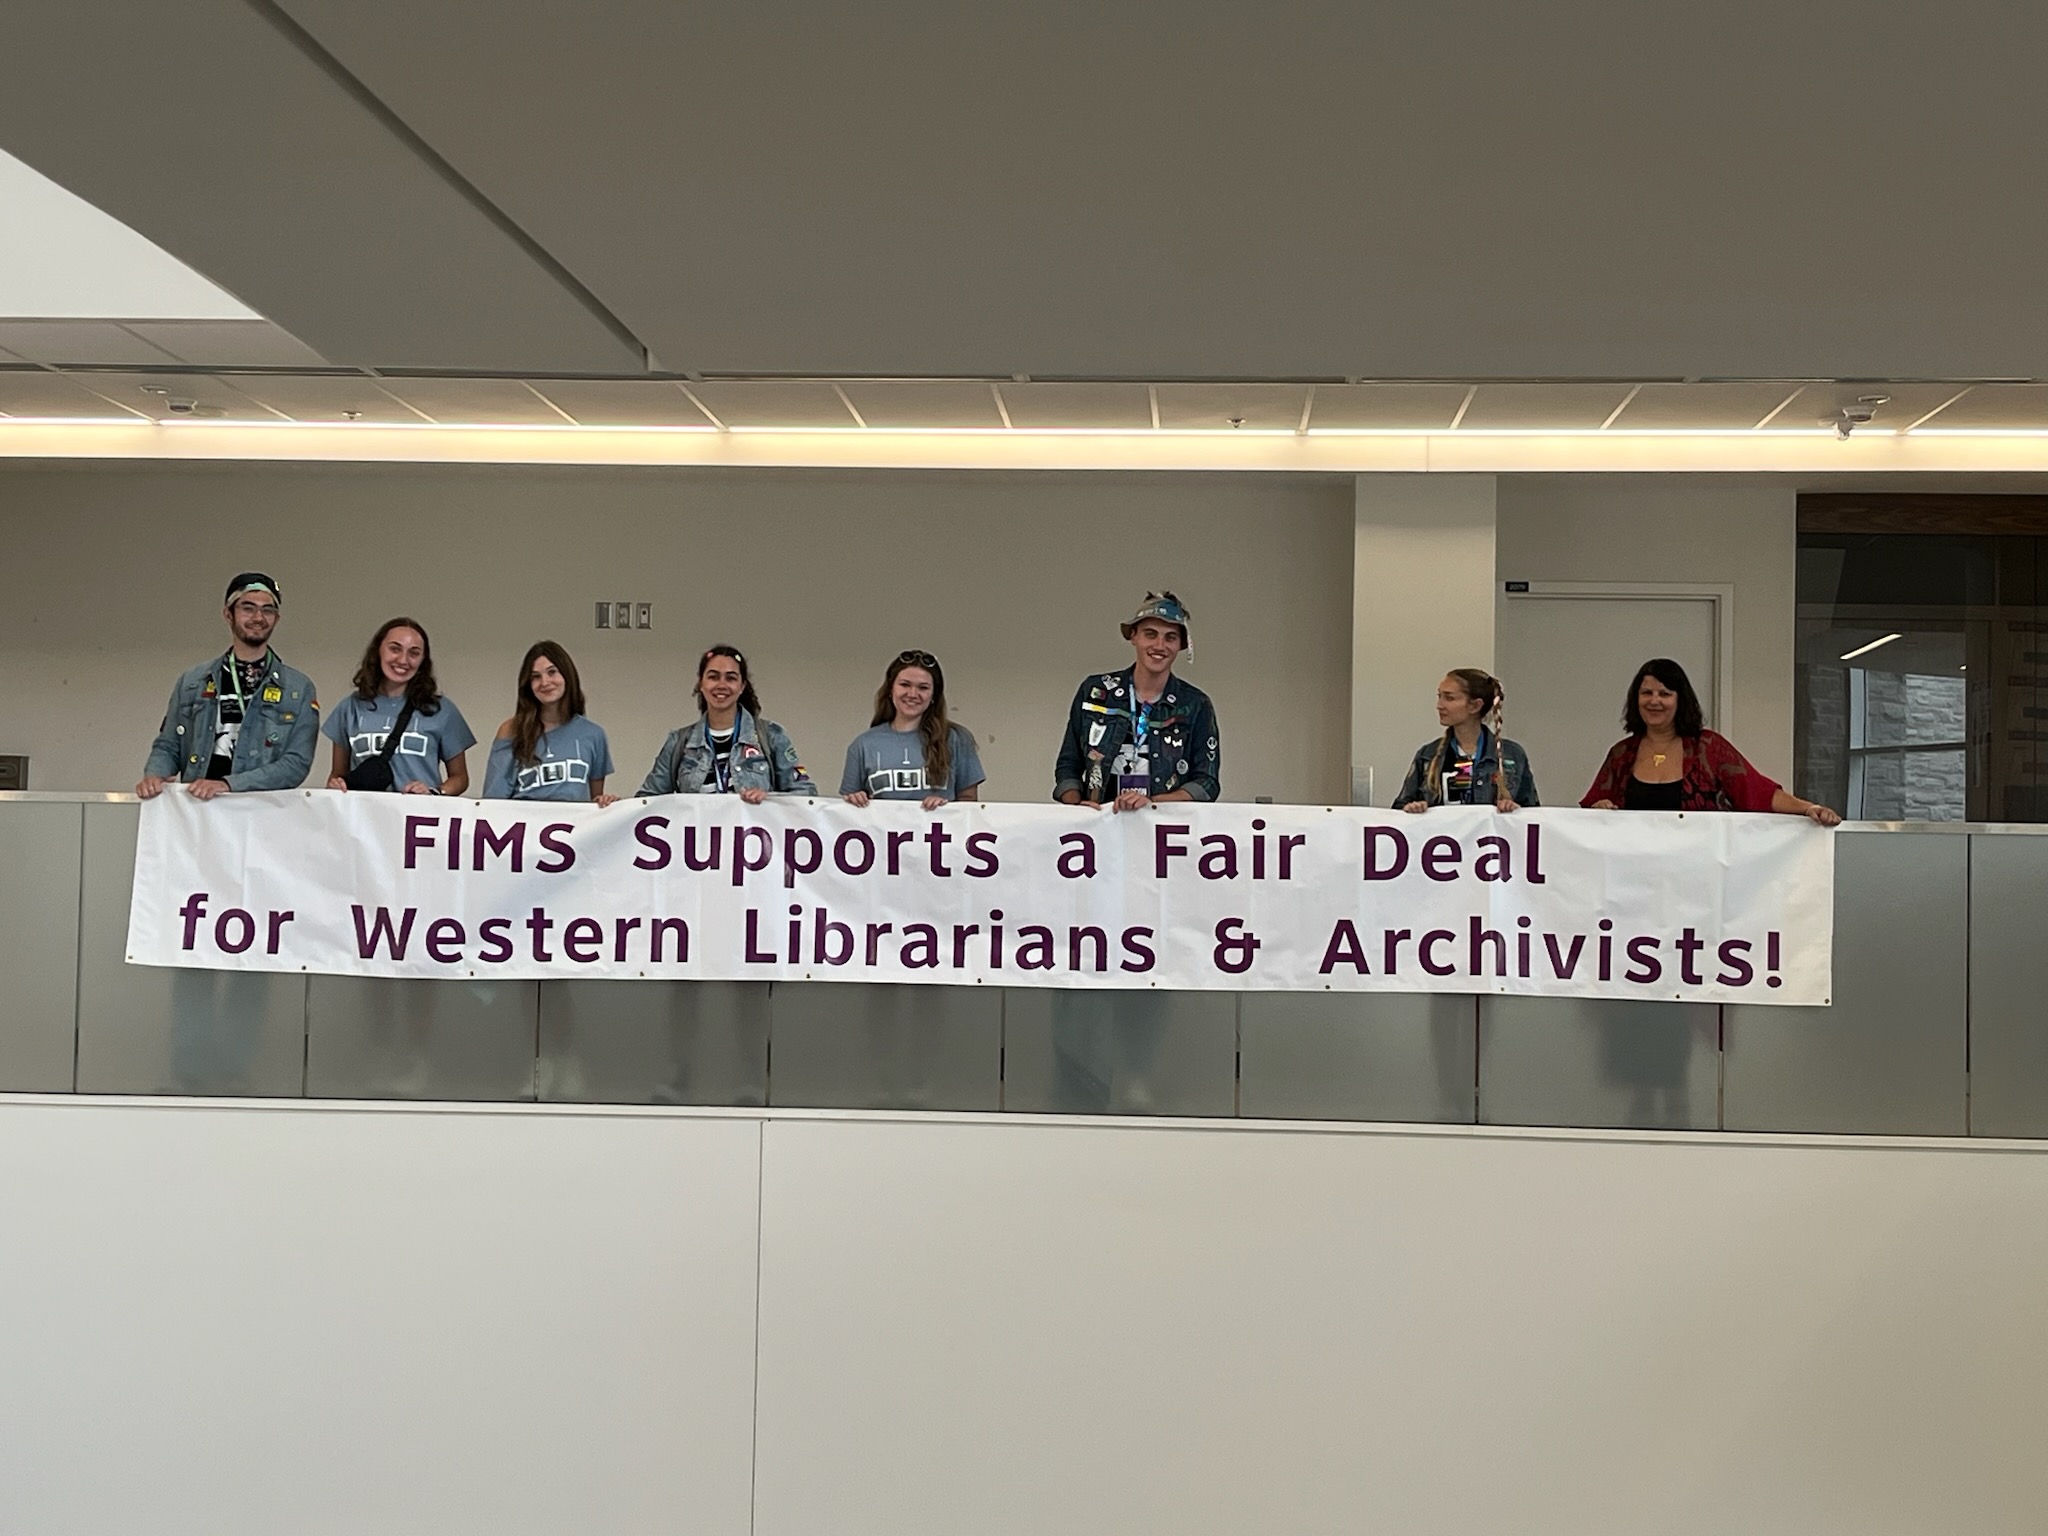 People holding a banner saying "FIMS Supports a Fair Deal for Western Librarians & Archivists"